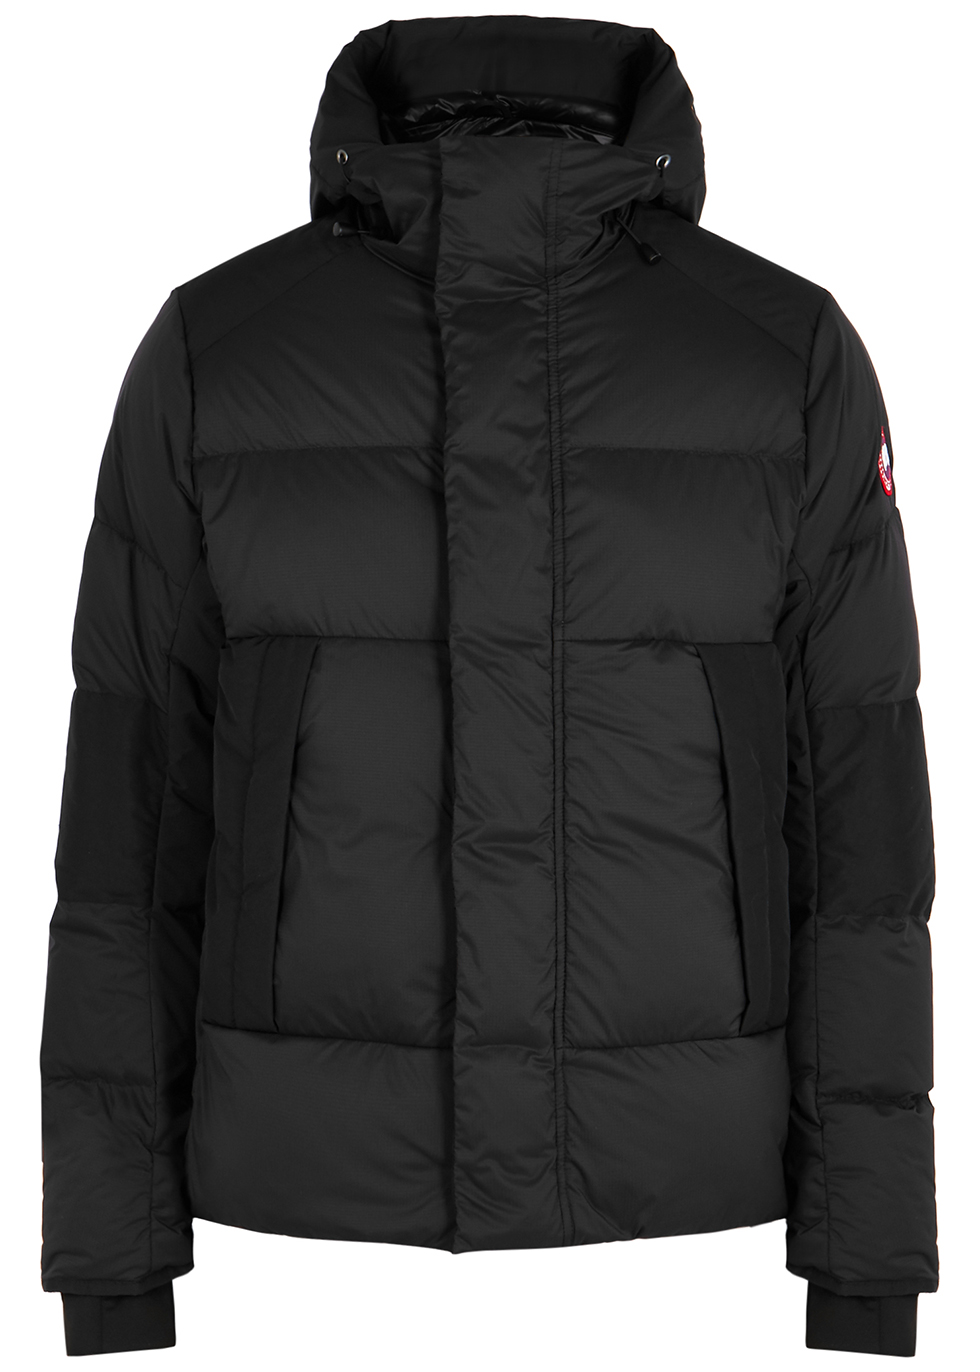 Canada Goose Armstrong quilted Feather-Light shell jacket - Harvey Nichols